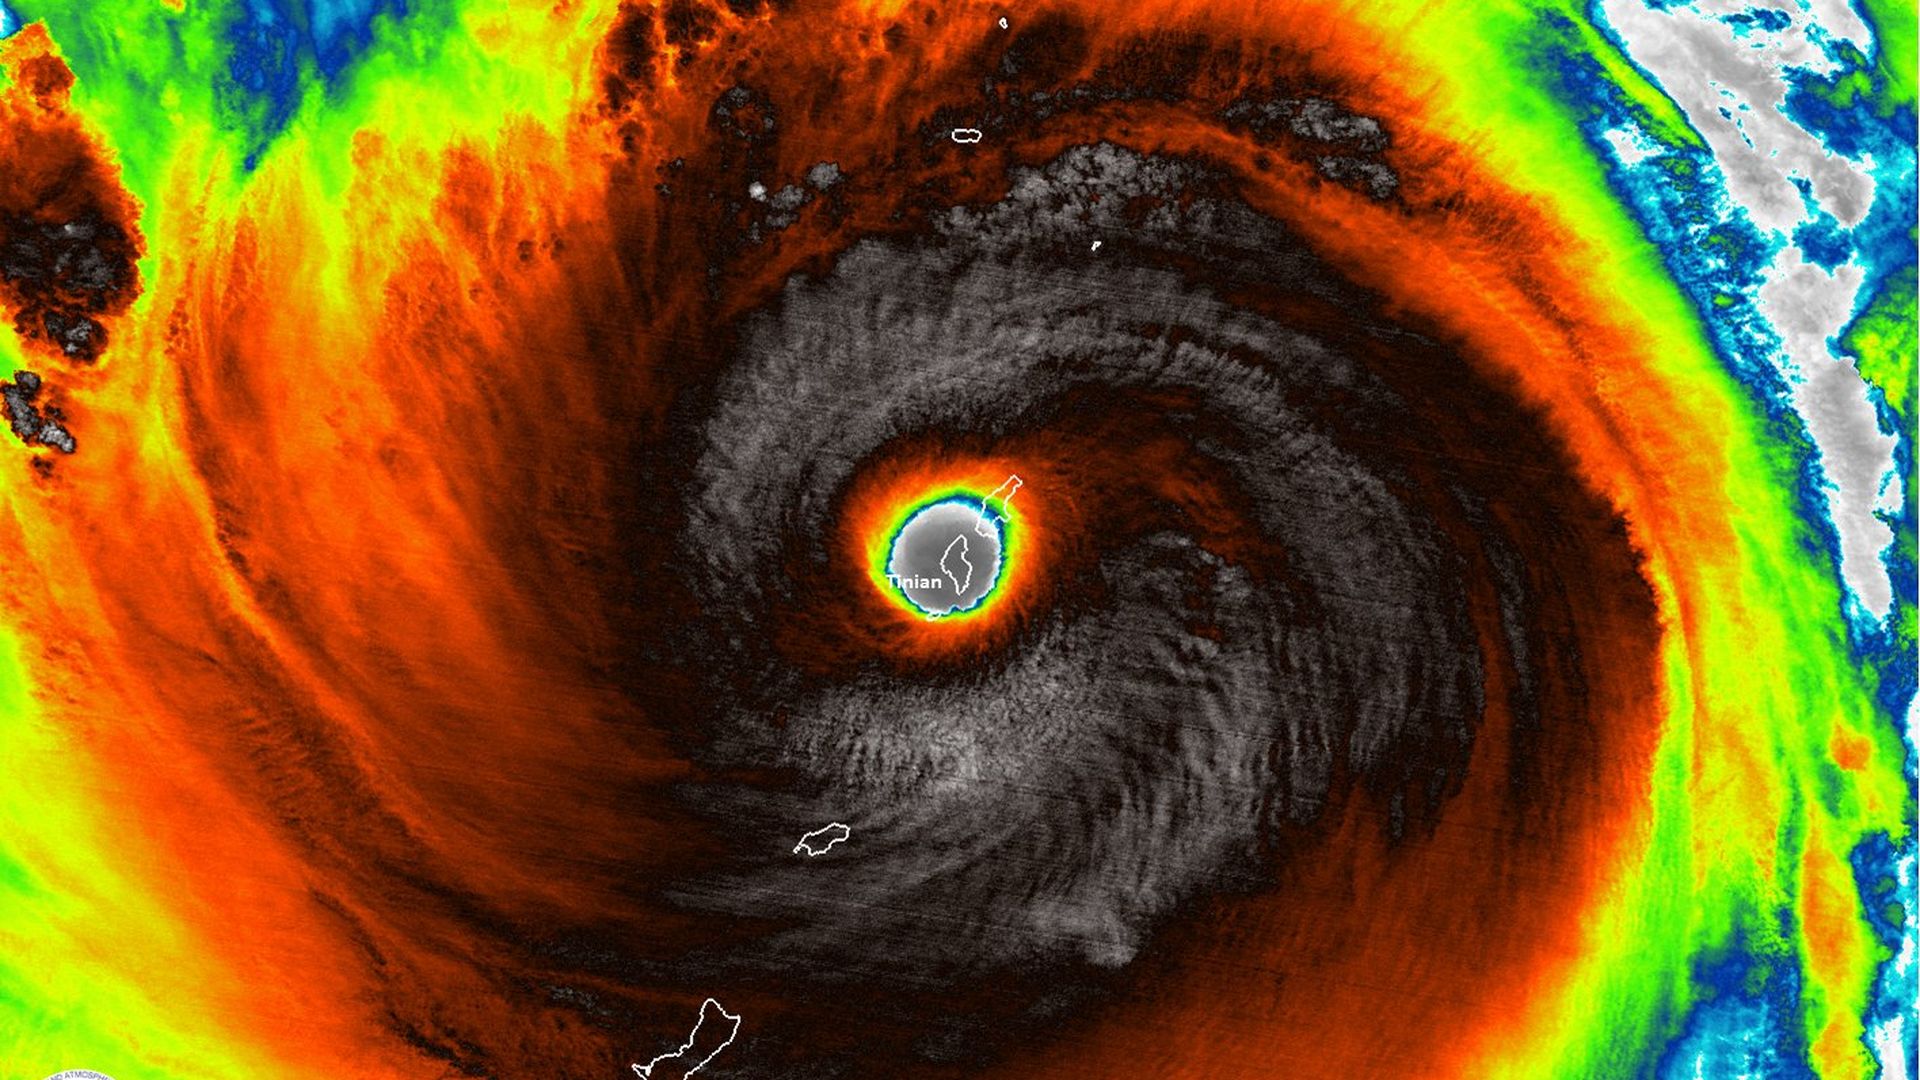 Super Typhoon Yutu swallows the island of Tinian on Oct. 24, 2018 as a strong Category 5 storm.